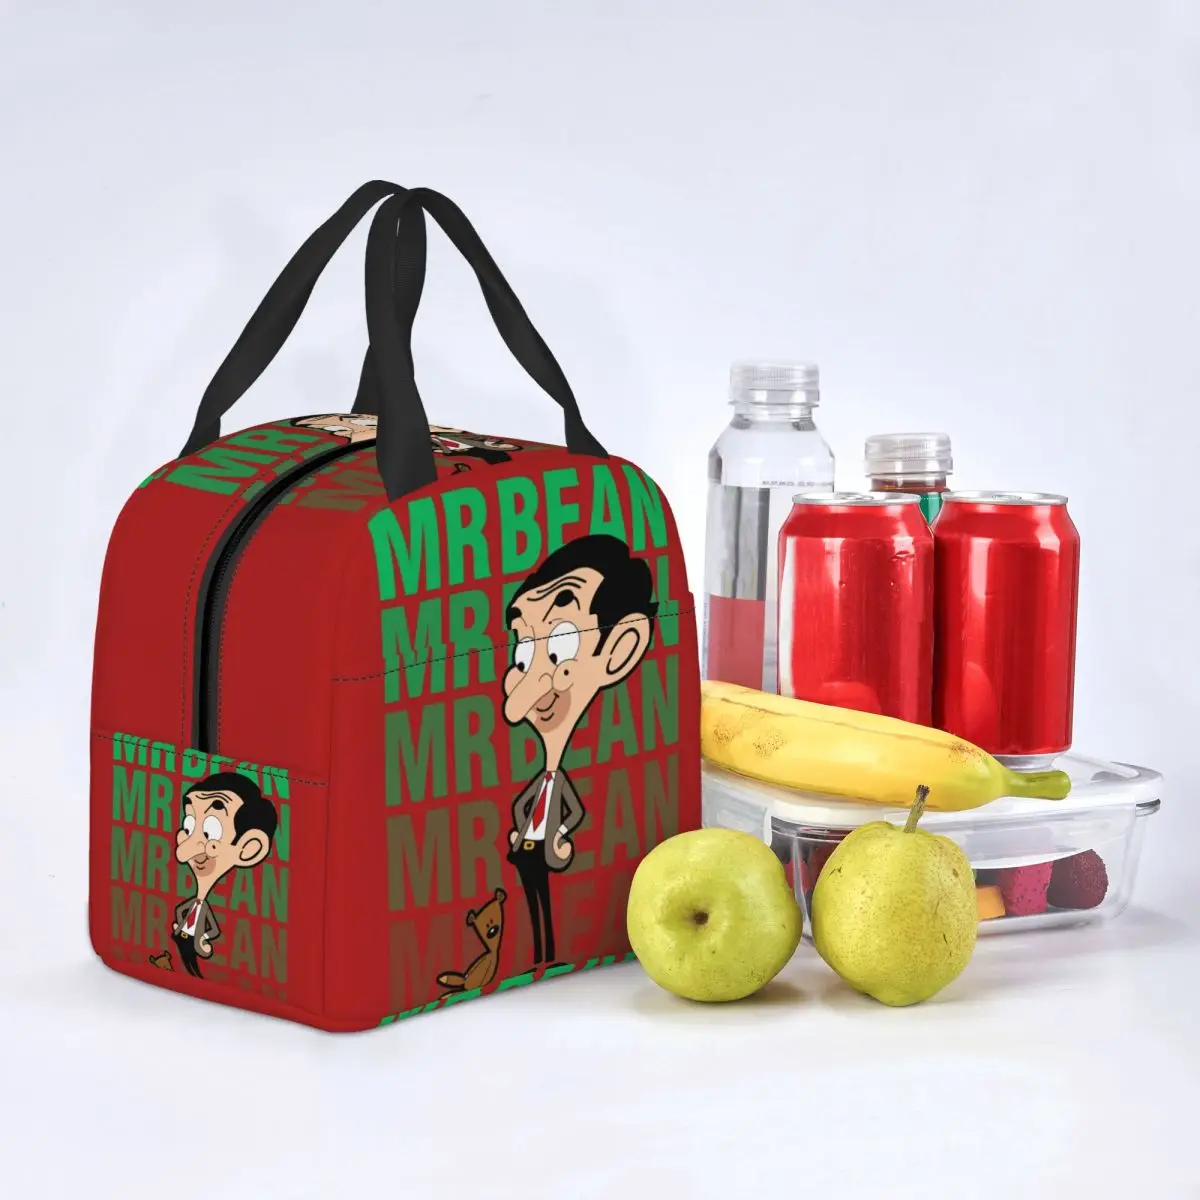 Mr Bean Insulated Lunch Tote Bag for Women British Comedy Tv Movies Portable Cooler Thermal Bento Box Kids School Children images - 6